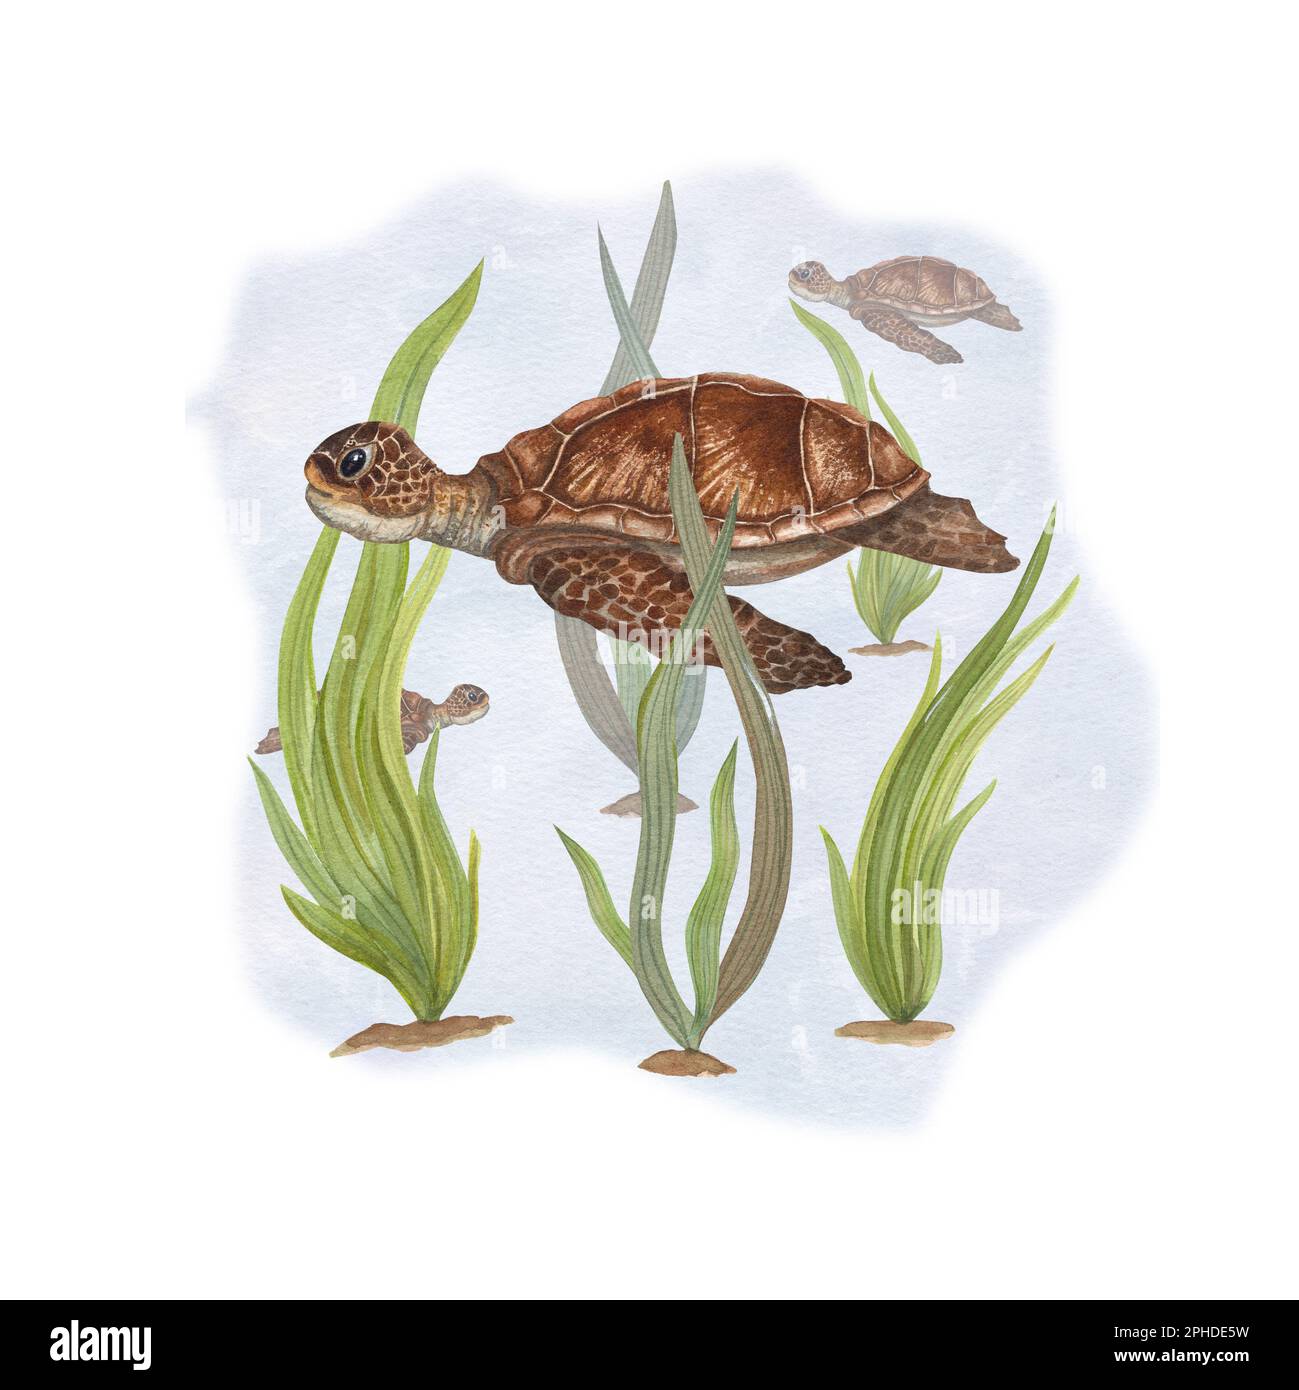 Watercolor illustration of turtles among weeds isolated on white background. Can be used for wallpaper, print, baby textile, scrapbooking, postcards Stock Photo